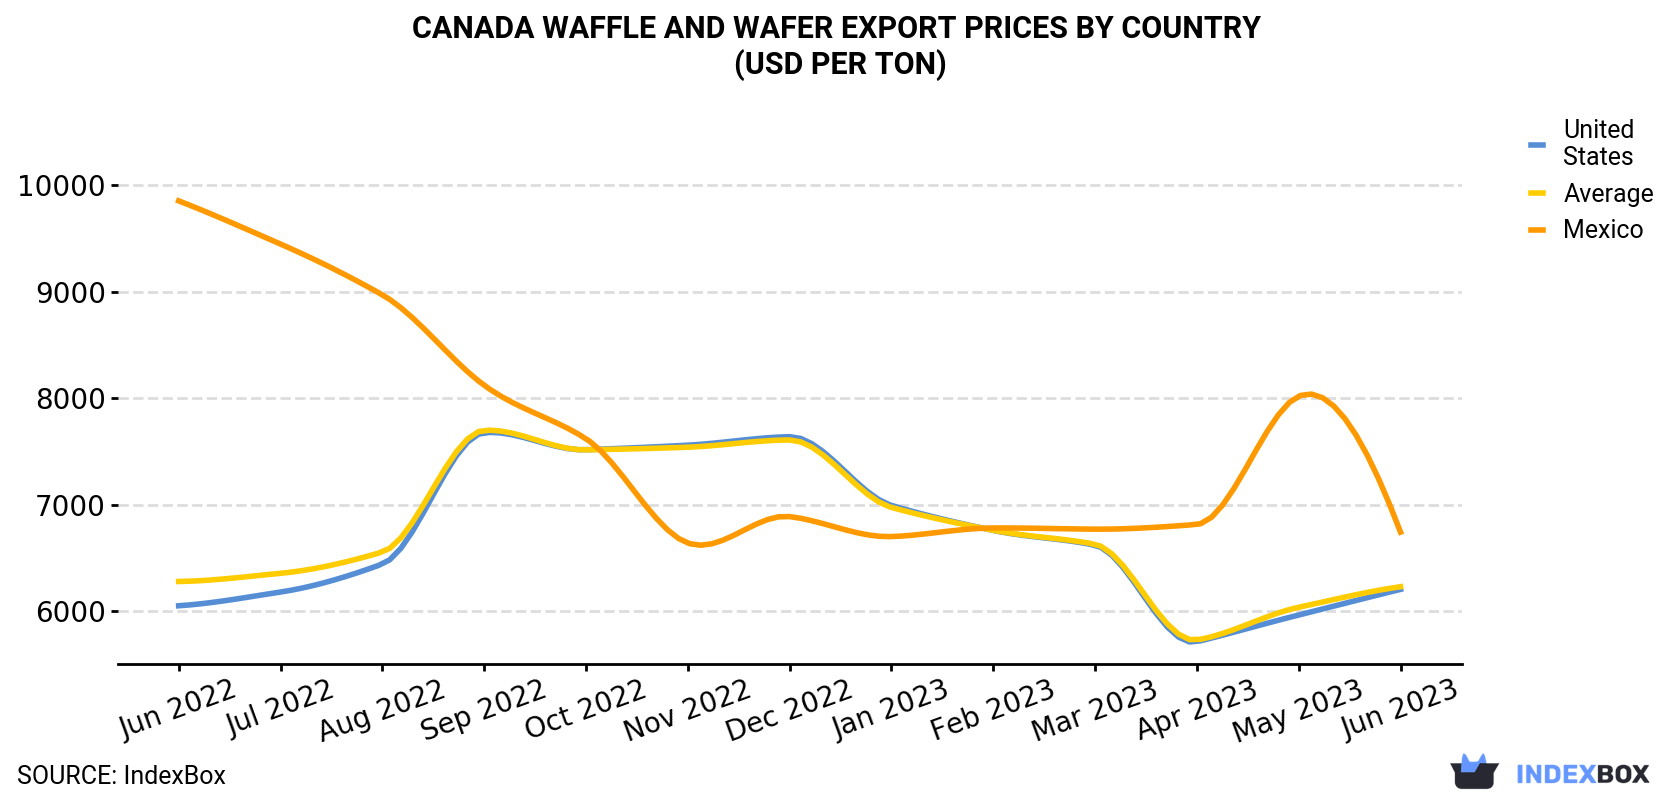 Canada Waffle and Wafer Export Prices By Country (USD Per Ton)